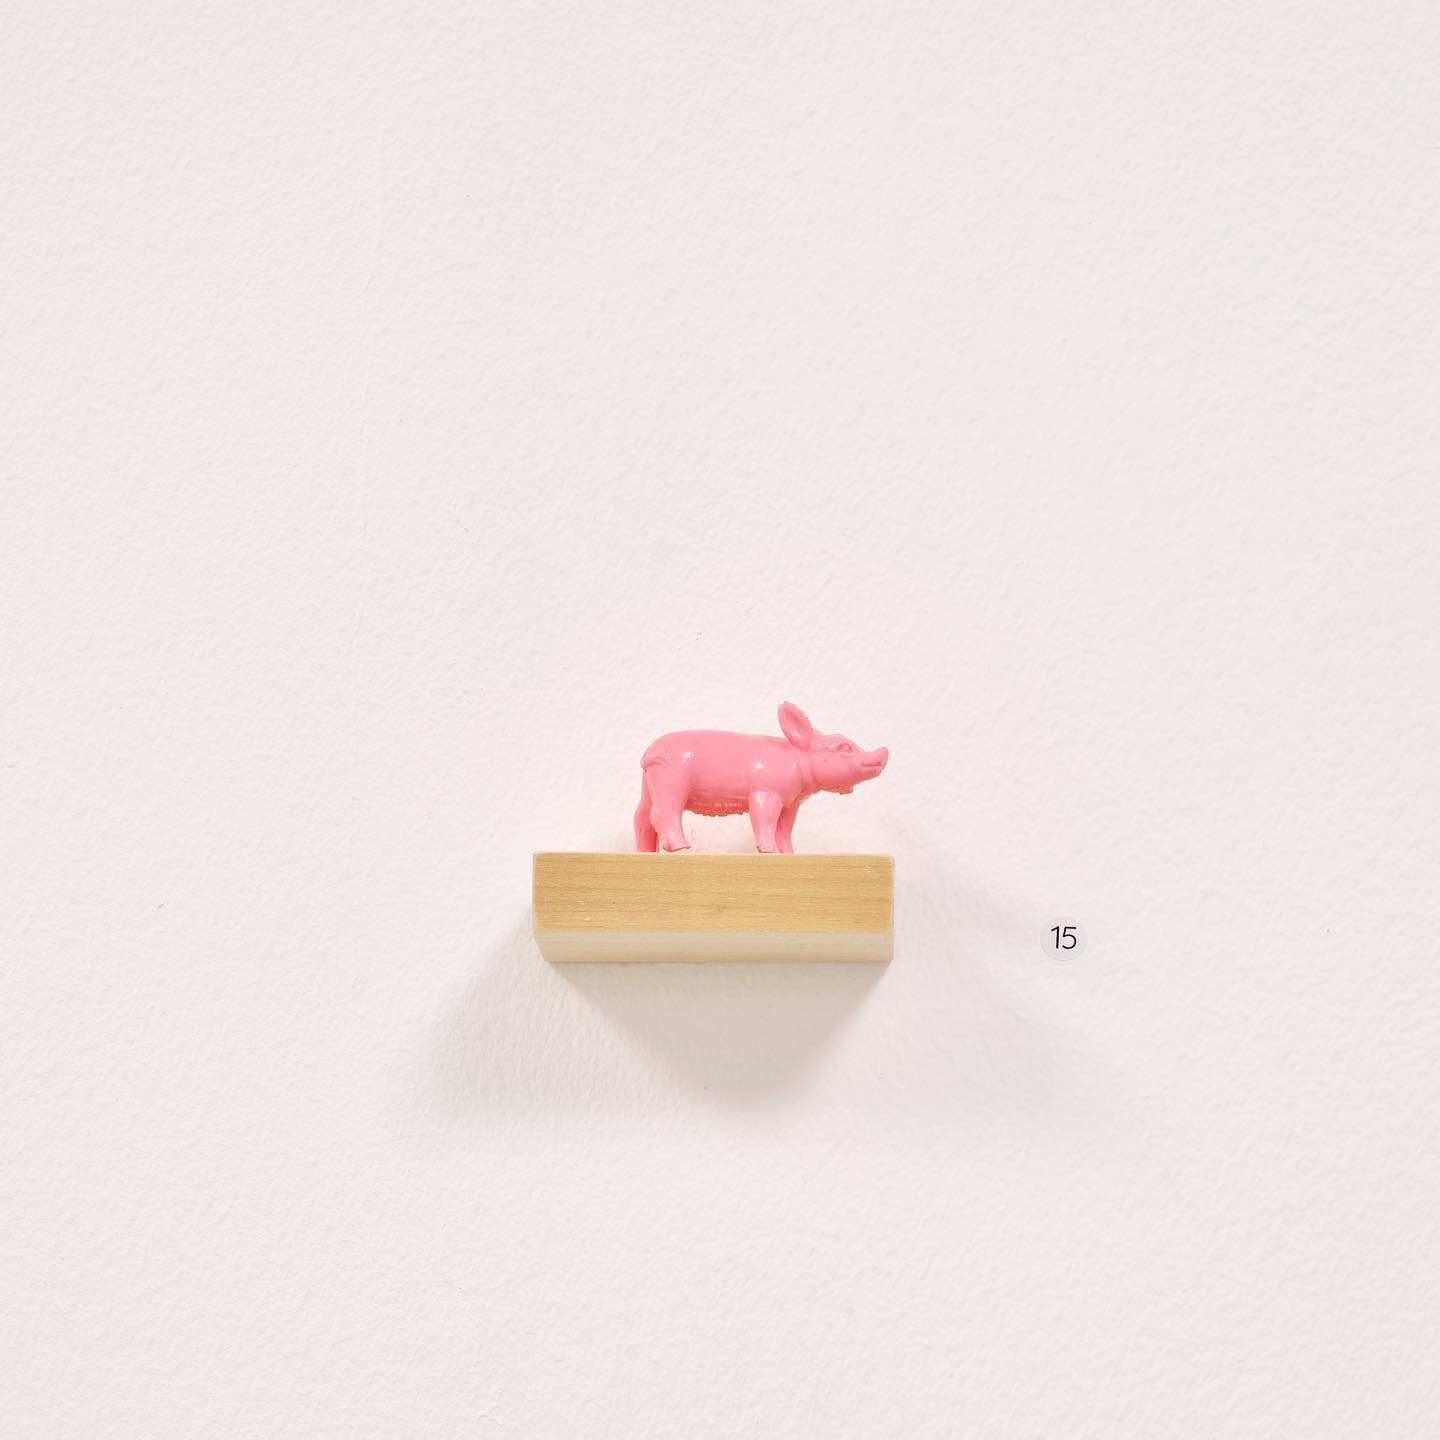 Last 2 days to catch Flying too Close to The Sun ☀️🦎❤️👗🦀🐷 @qssartstudios 

&lsquo;Muc (Pig)&rsquo;
Resin cast on wooden shelf 

#pig #farm #sculpture #installation #resin #cast #silicone #pink #visualart #art #artist #emergingartist #soloshow #ex